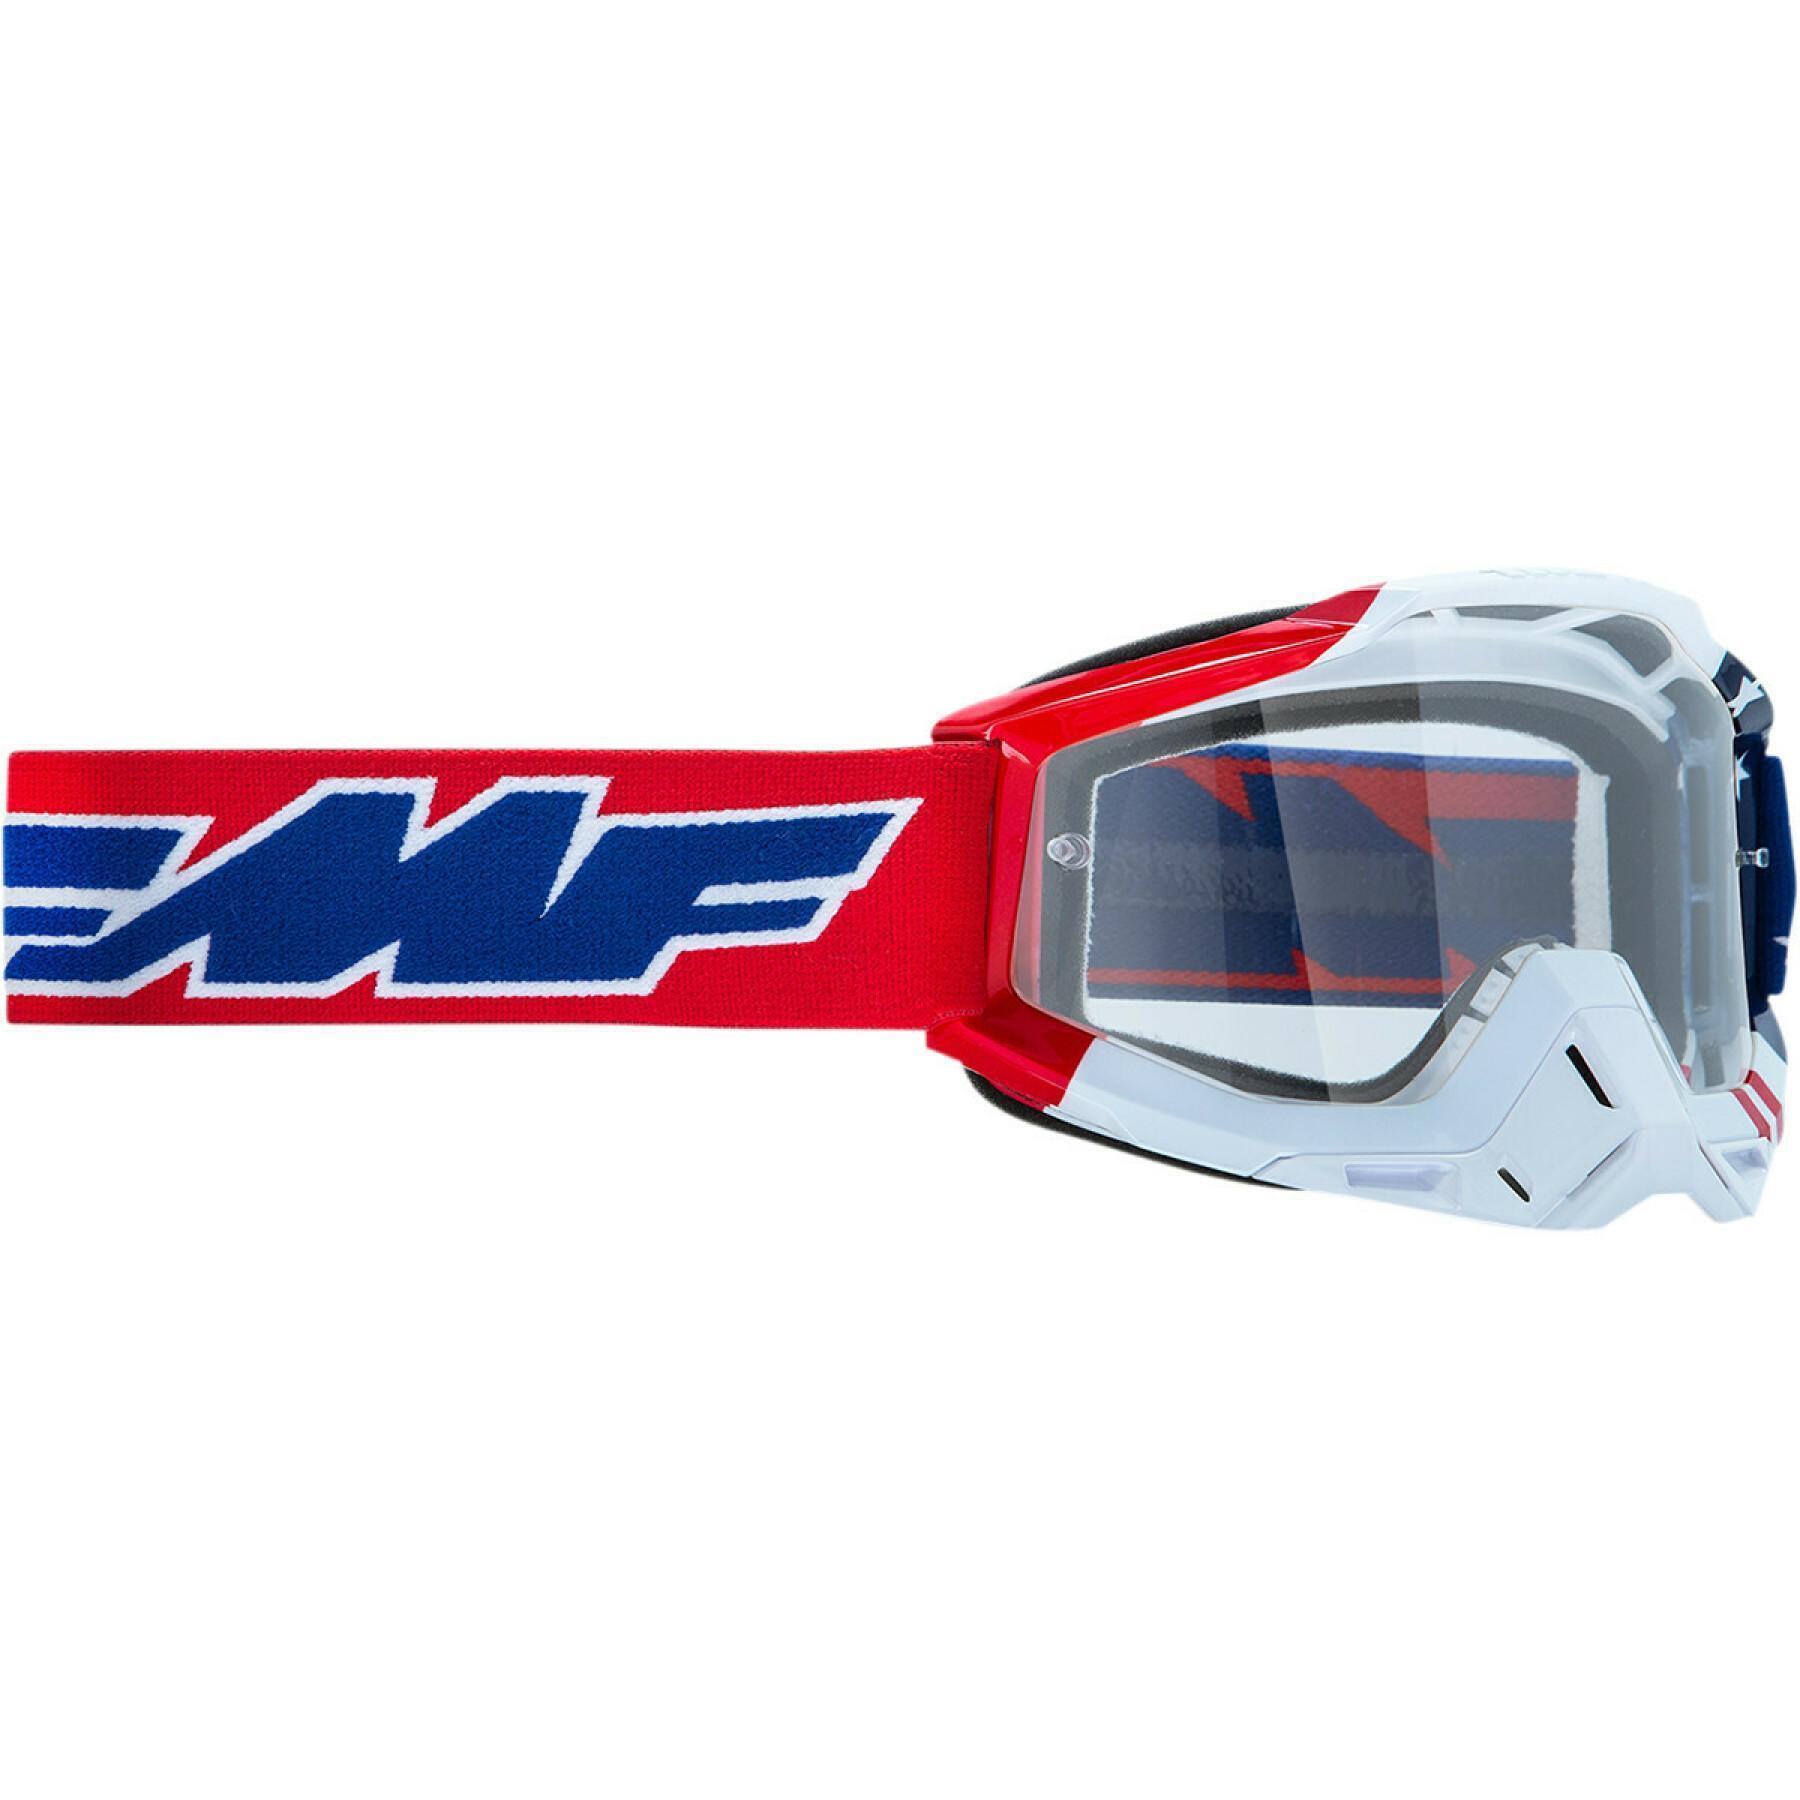 Motorcycle cross goggles FMF Vision us of a clr